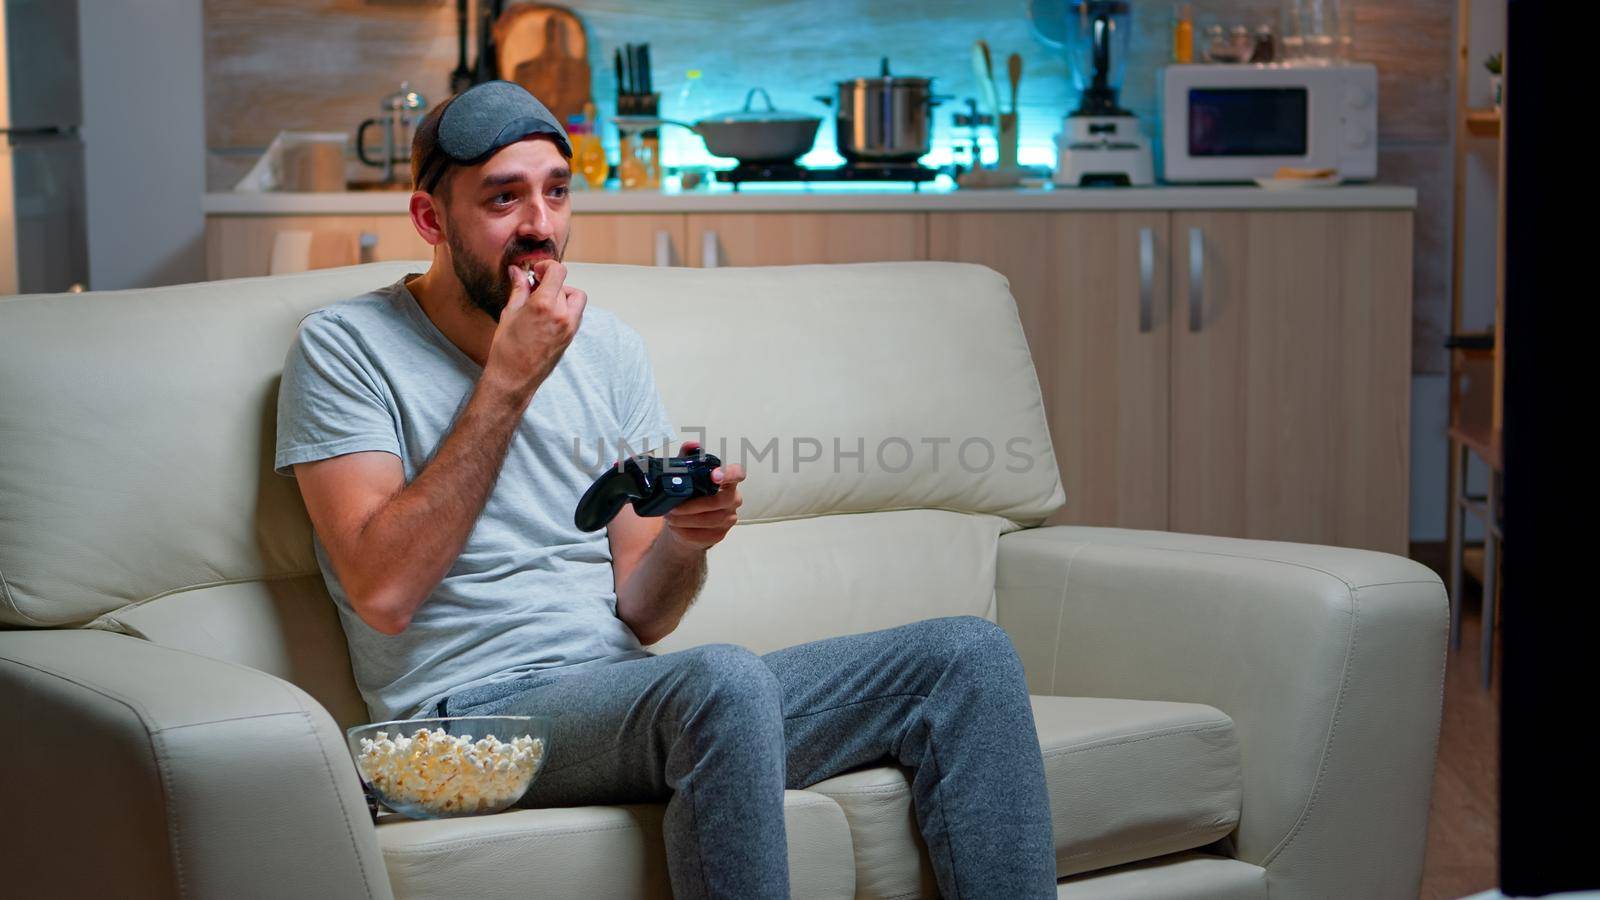 Upset pro gamer sitting on couch and playing soccer videogames for online competition using gaming joystick. Disappointed man looking at television eating popcorn late at night in kitchen